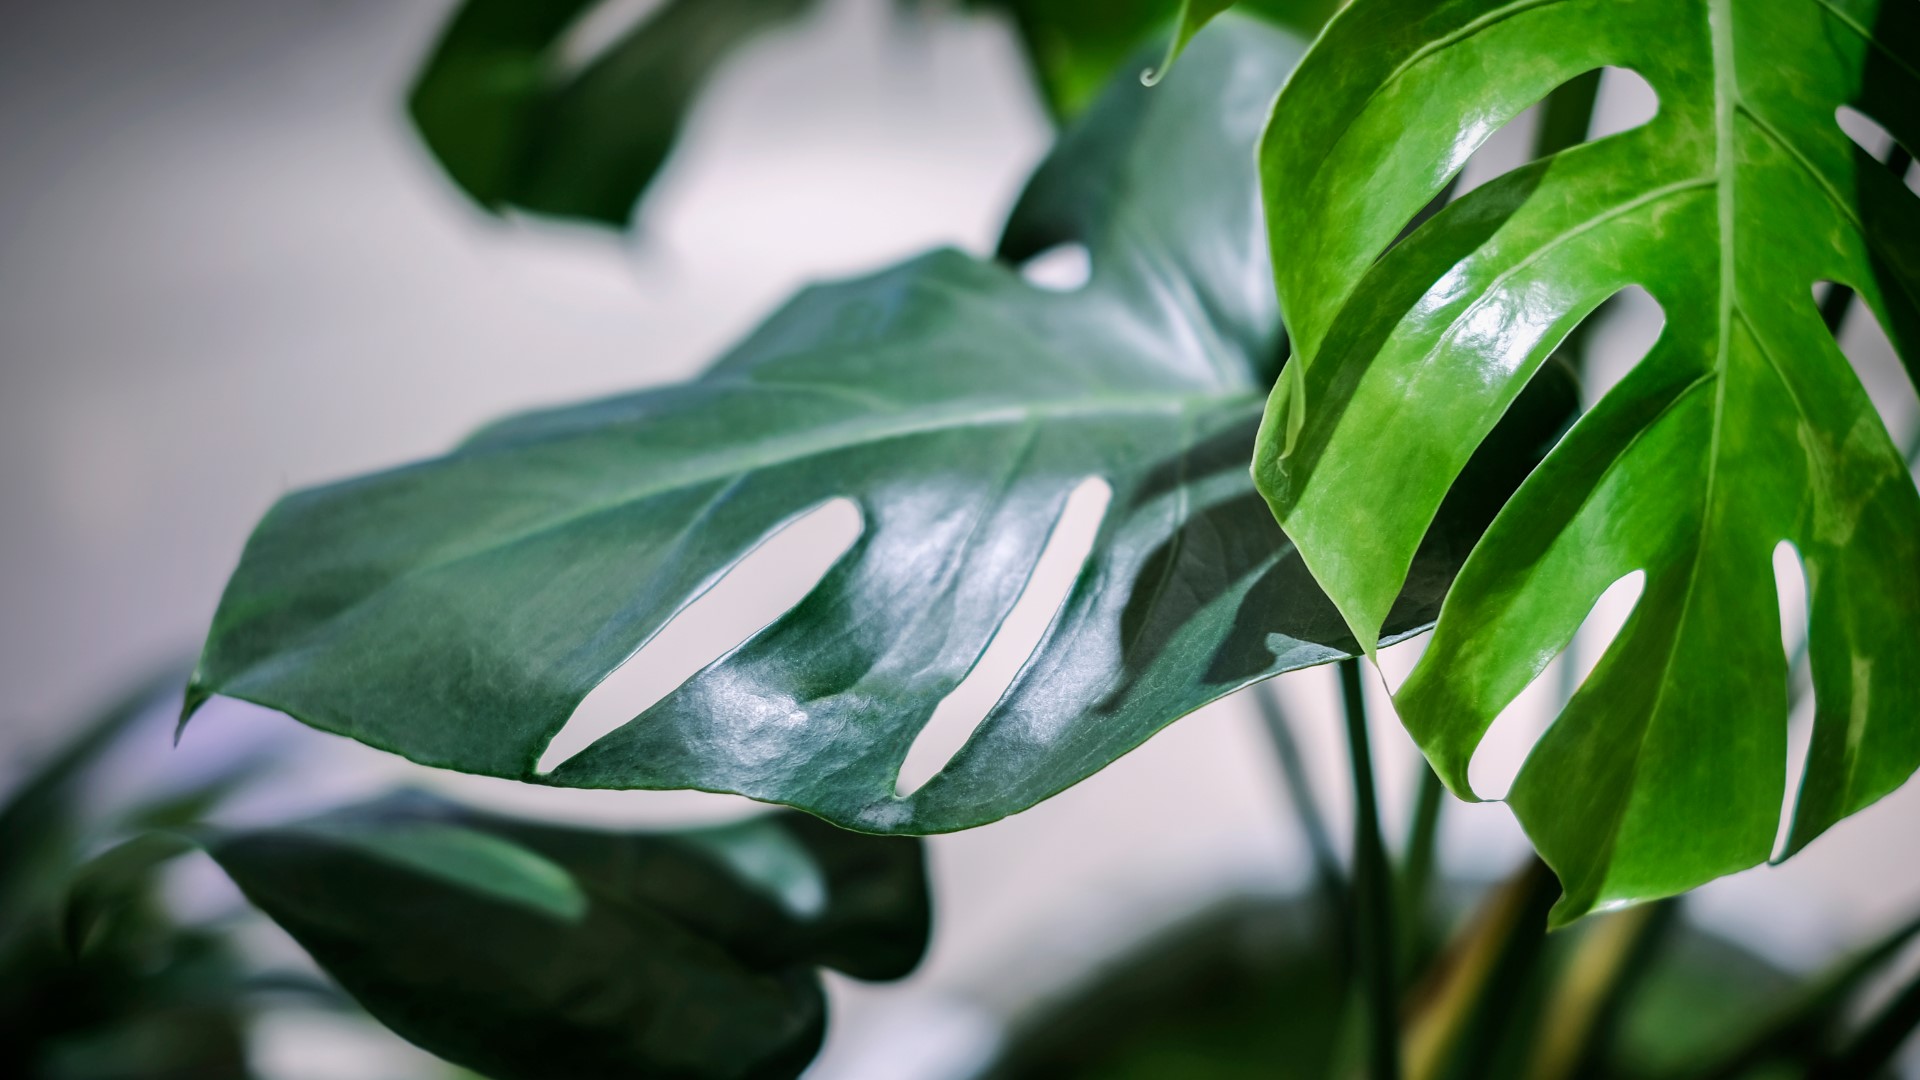 It's a trend that is popping up everywhere: Monstera leaves. The large bright green leaves are being used in fashion, art, accessories, and even home furnishings. J Schwanke from uBloom.com has some great ideas on how to incorporate it in your lifestyle.